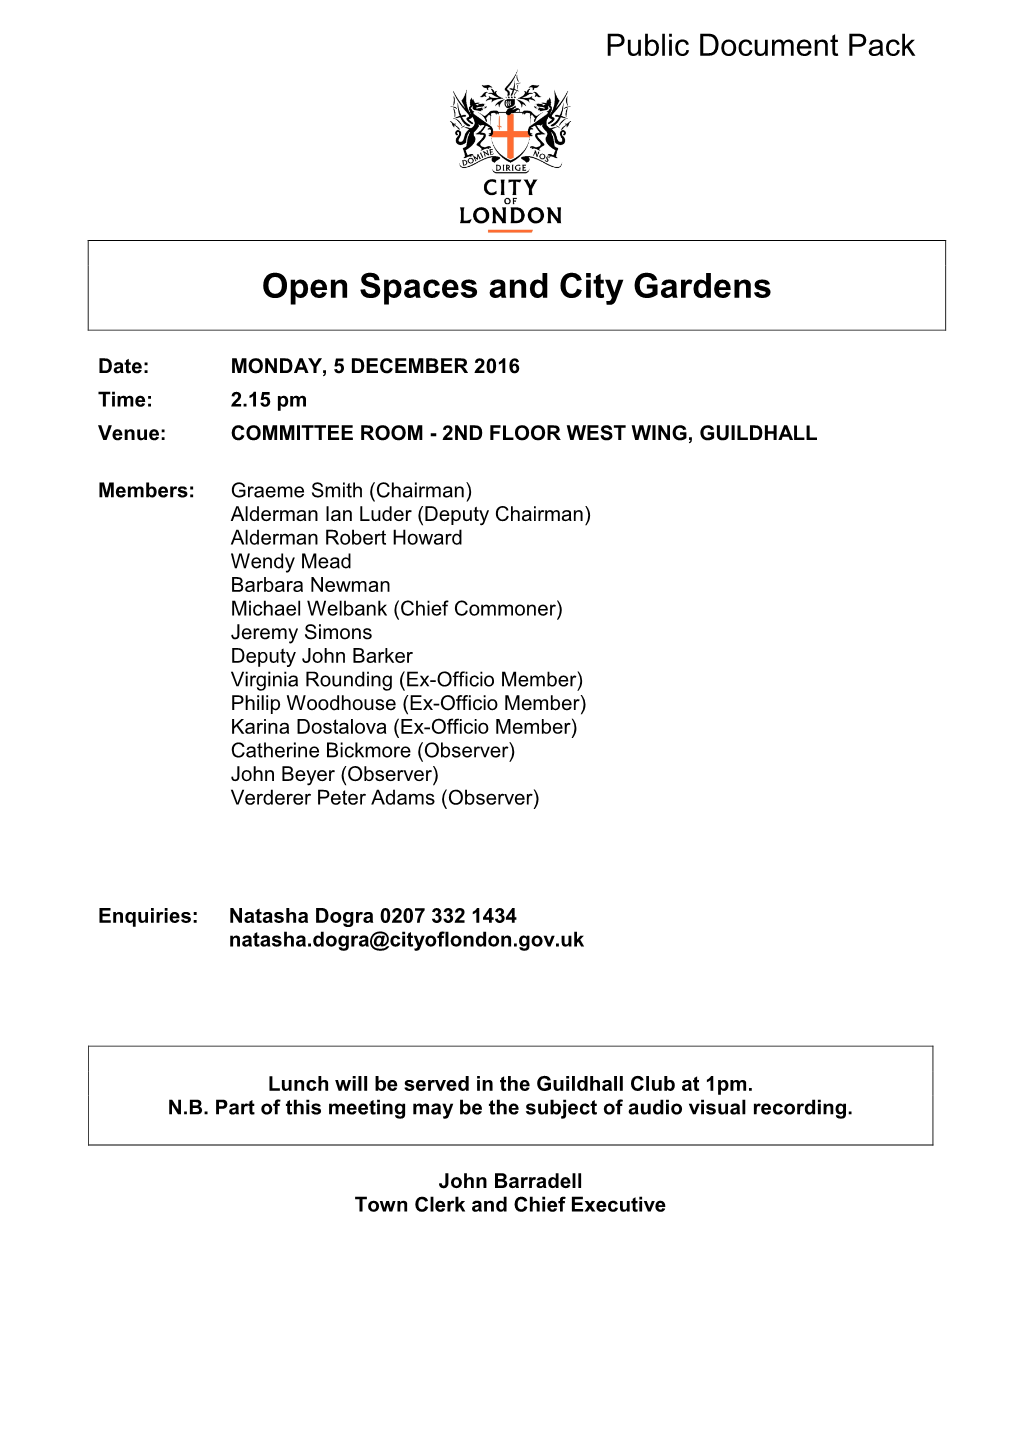 (Public Pack)Agenda Document for Open Spaces and City Gardens, 05